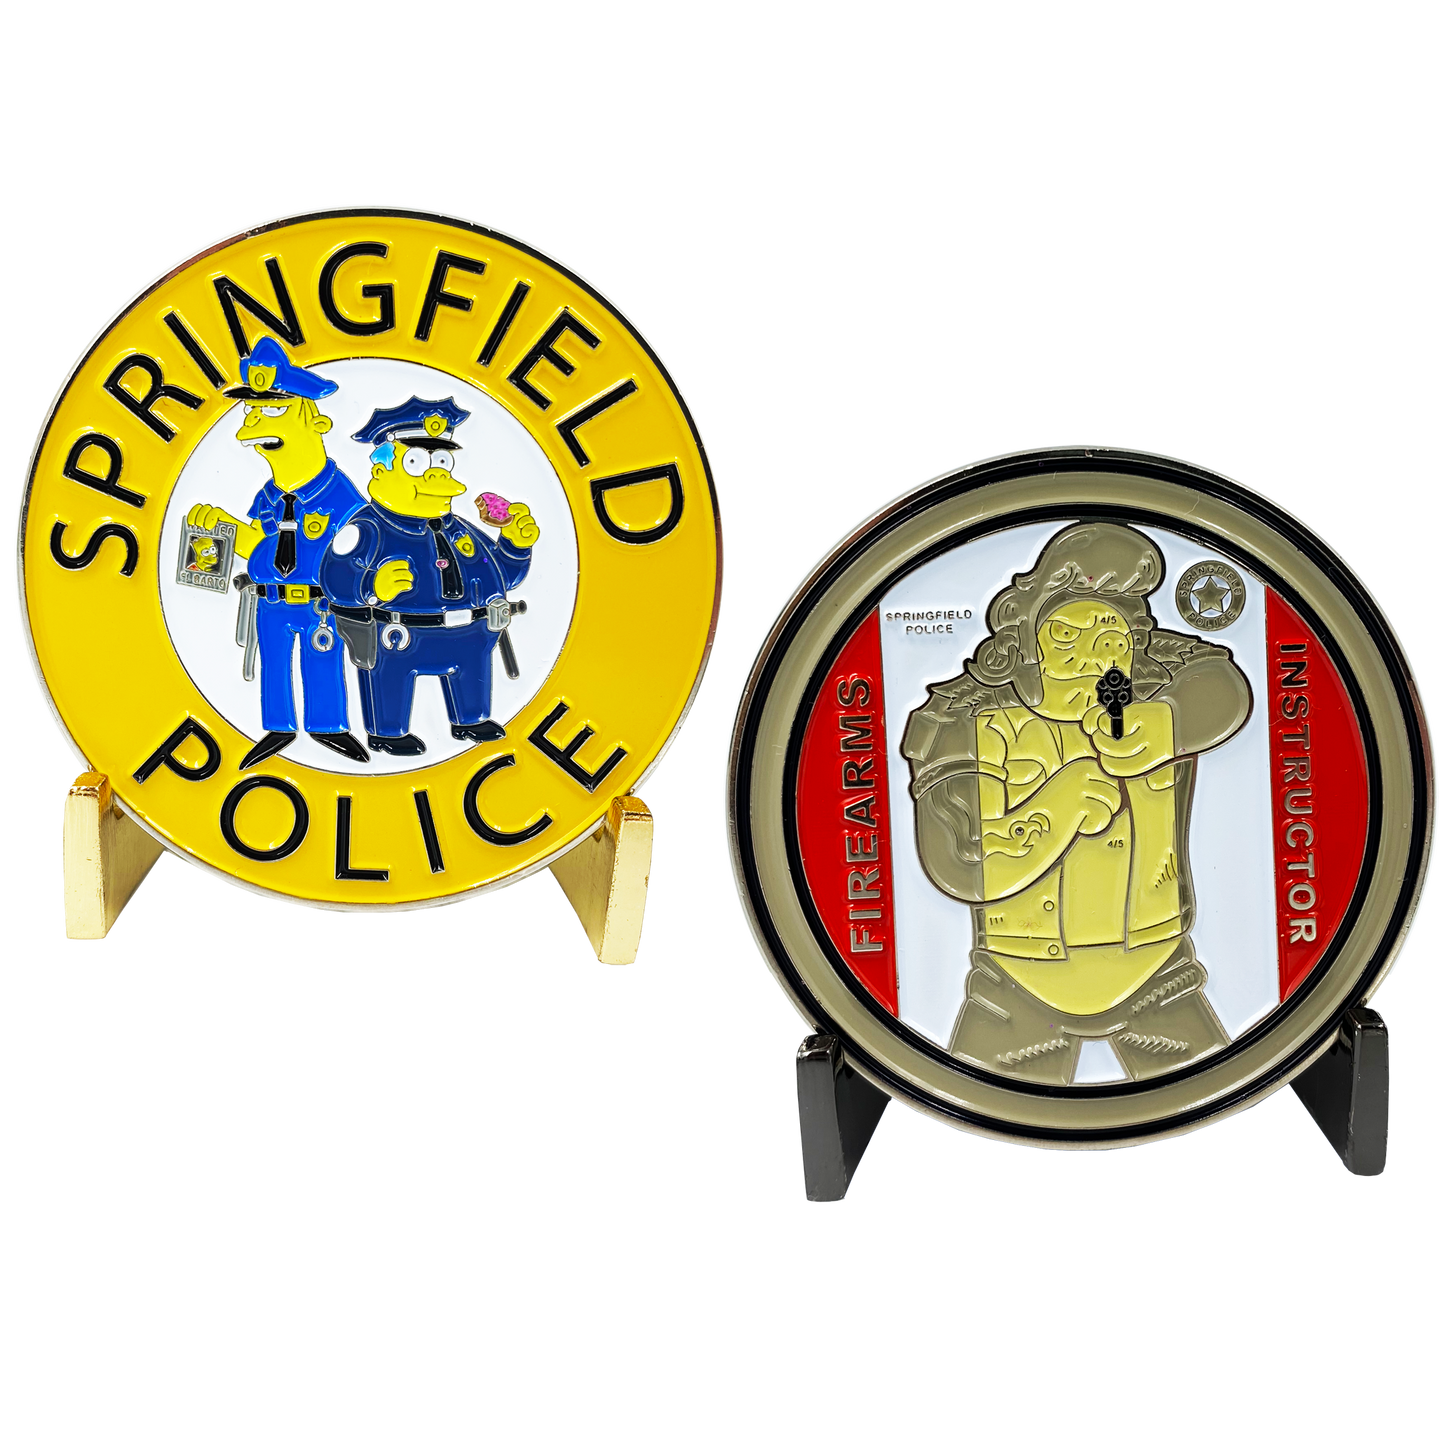 DL3-01 Springfield Police inspired by Simpsons: Firearms Instructor Paper Target Challenge Coin